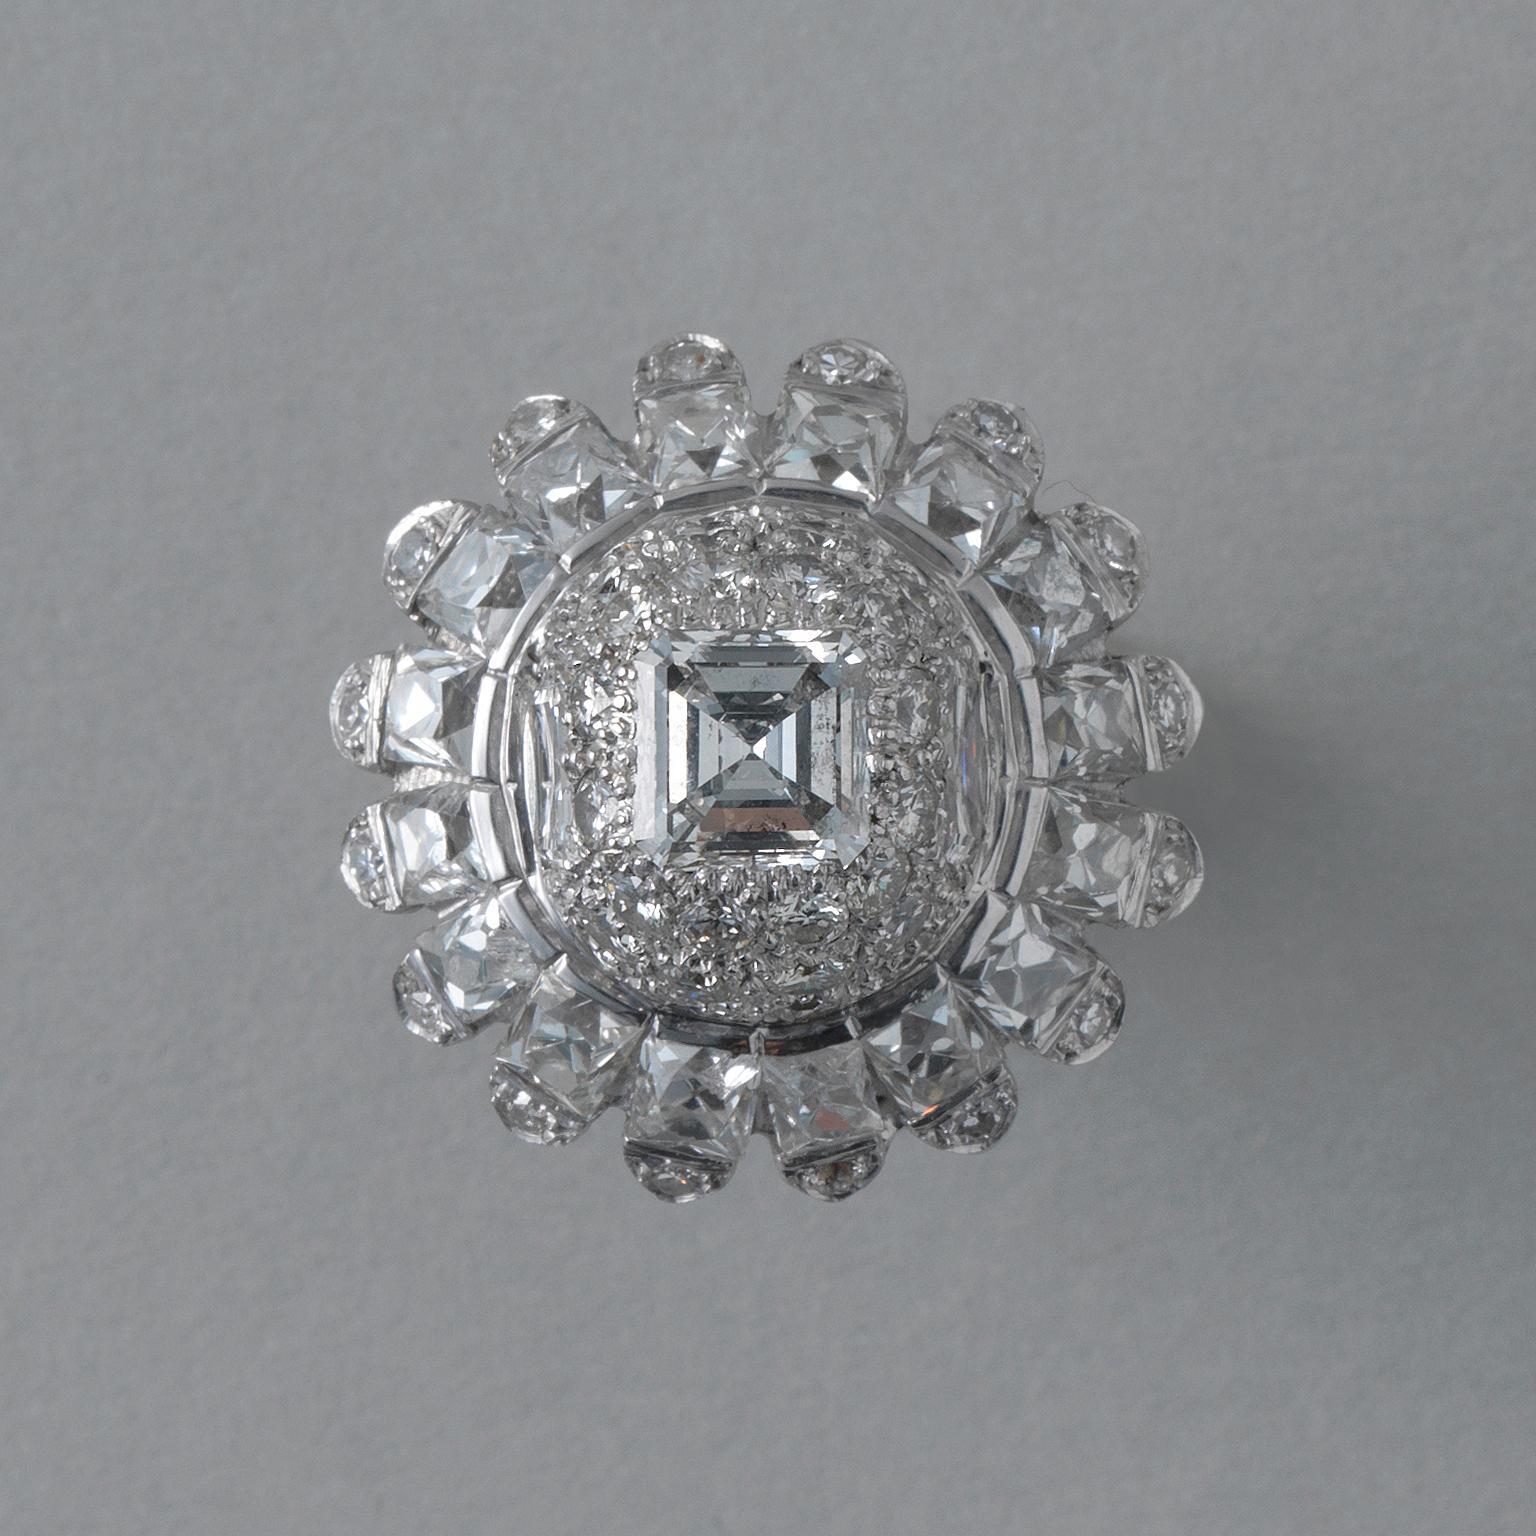 A platinum cocktail ring in the shape of a flower with a high dome with 40 brilliant-cut and 3 large carré-cut pavé-set diamonds (two app. 0.9 carats H-I, VS and I, SI; one centre stone app. 1.35 carats G-H, VS). The petals are set with 16